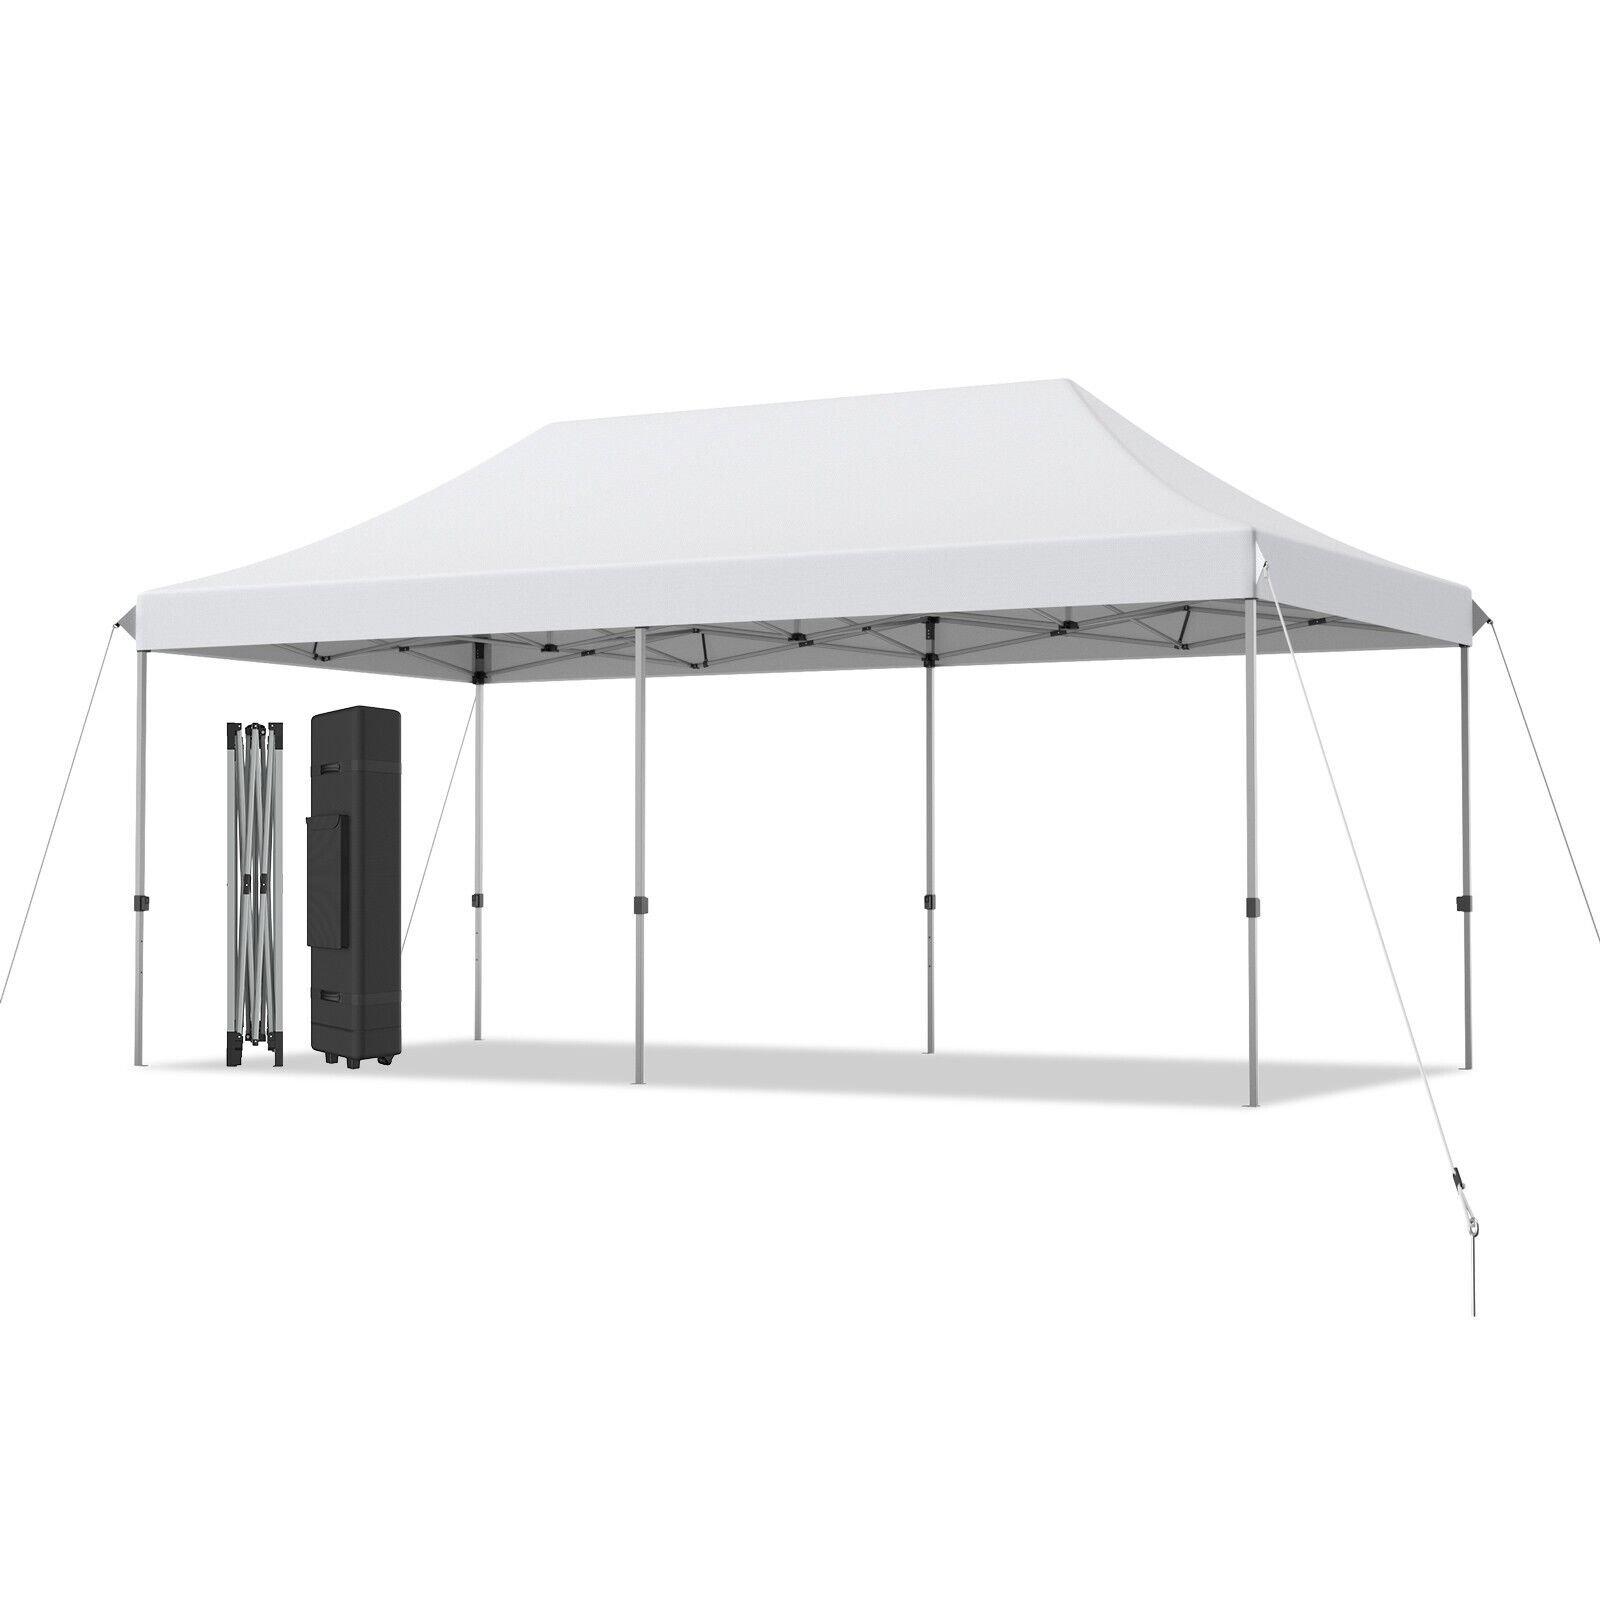 3 x 6m Folding Tent Canopy Adjustable Height Shelter Outdoor Wheeled Storage Bag